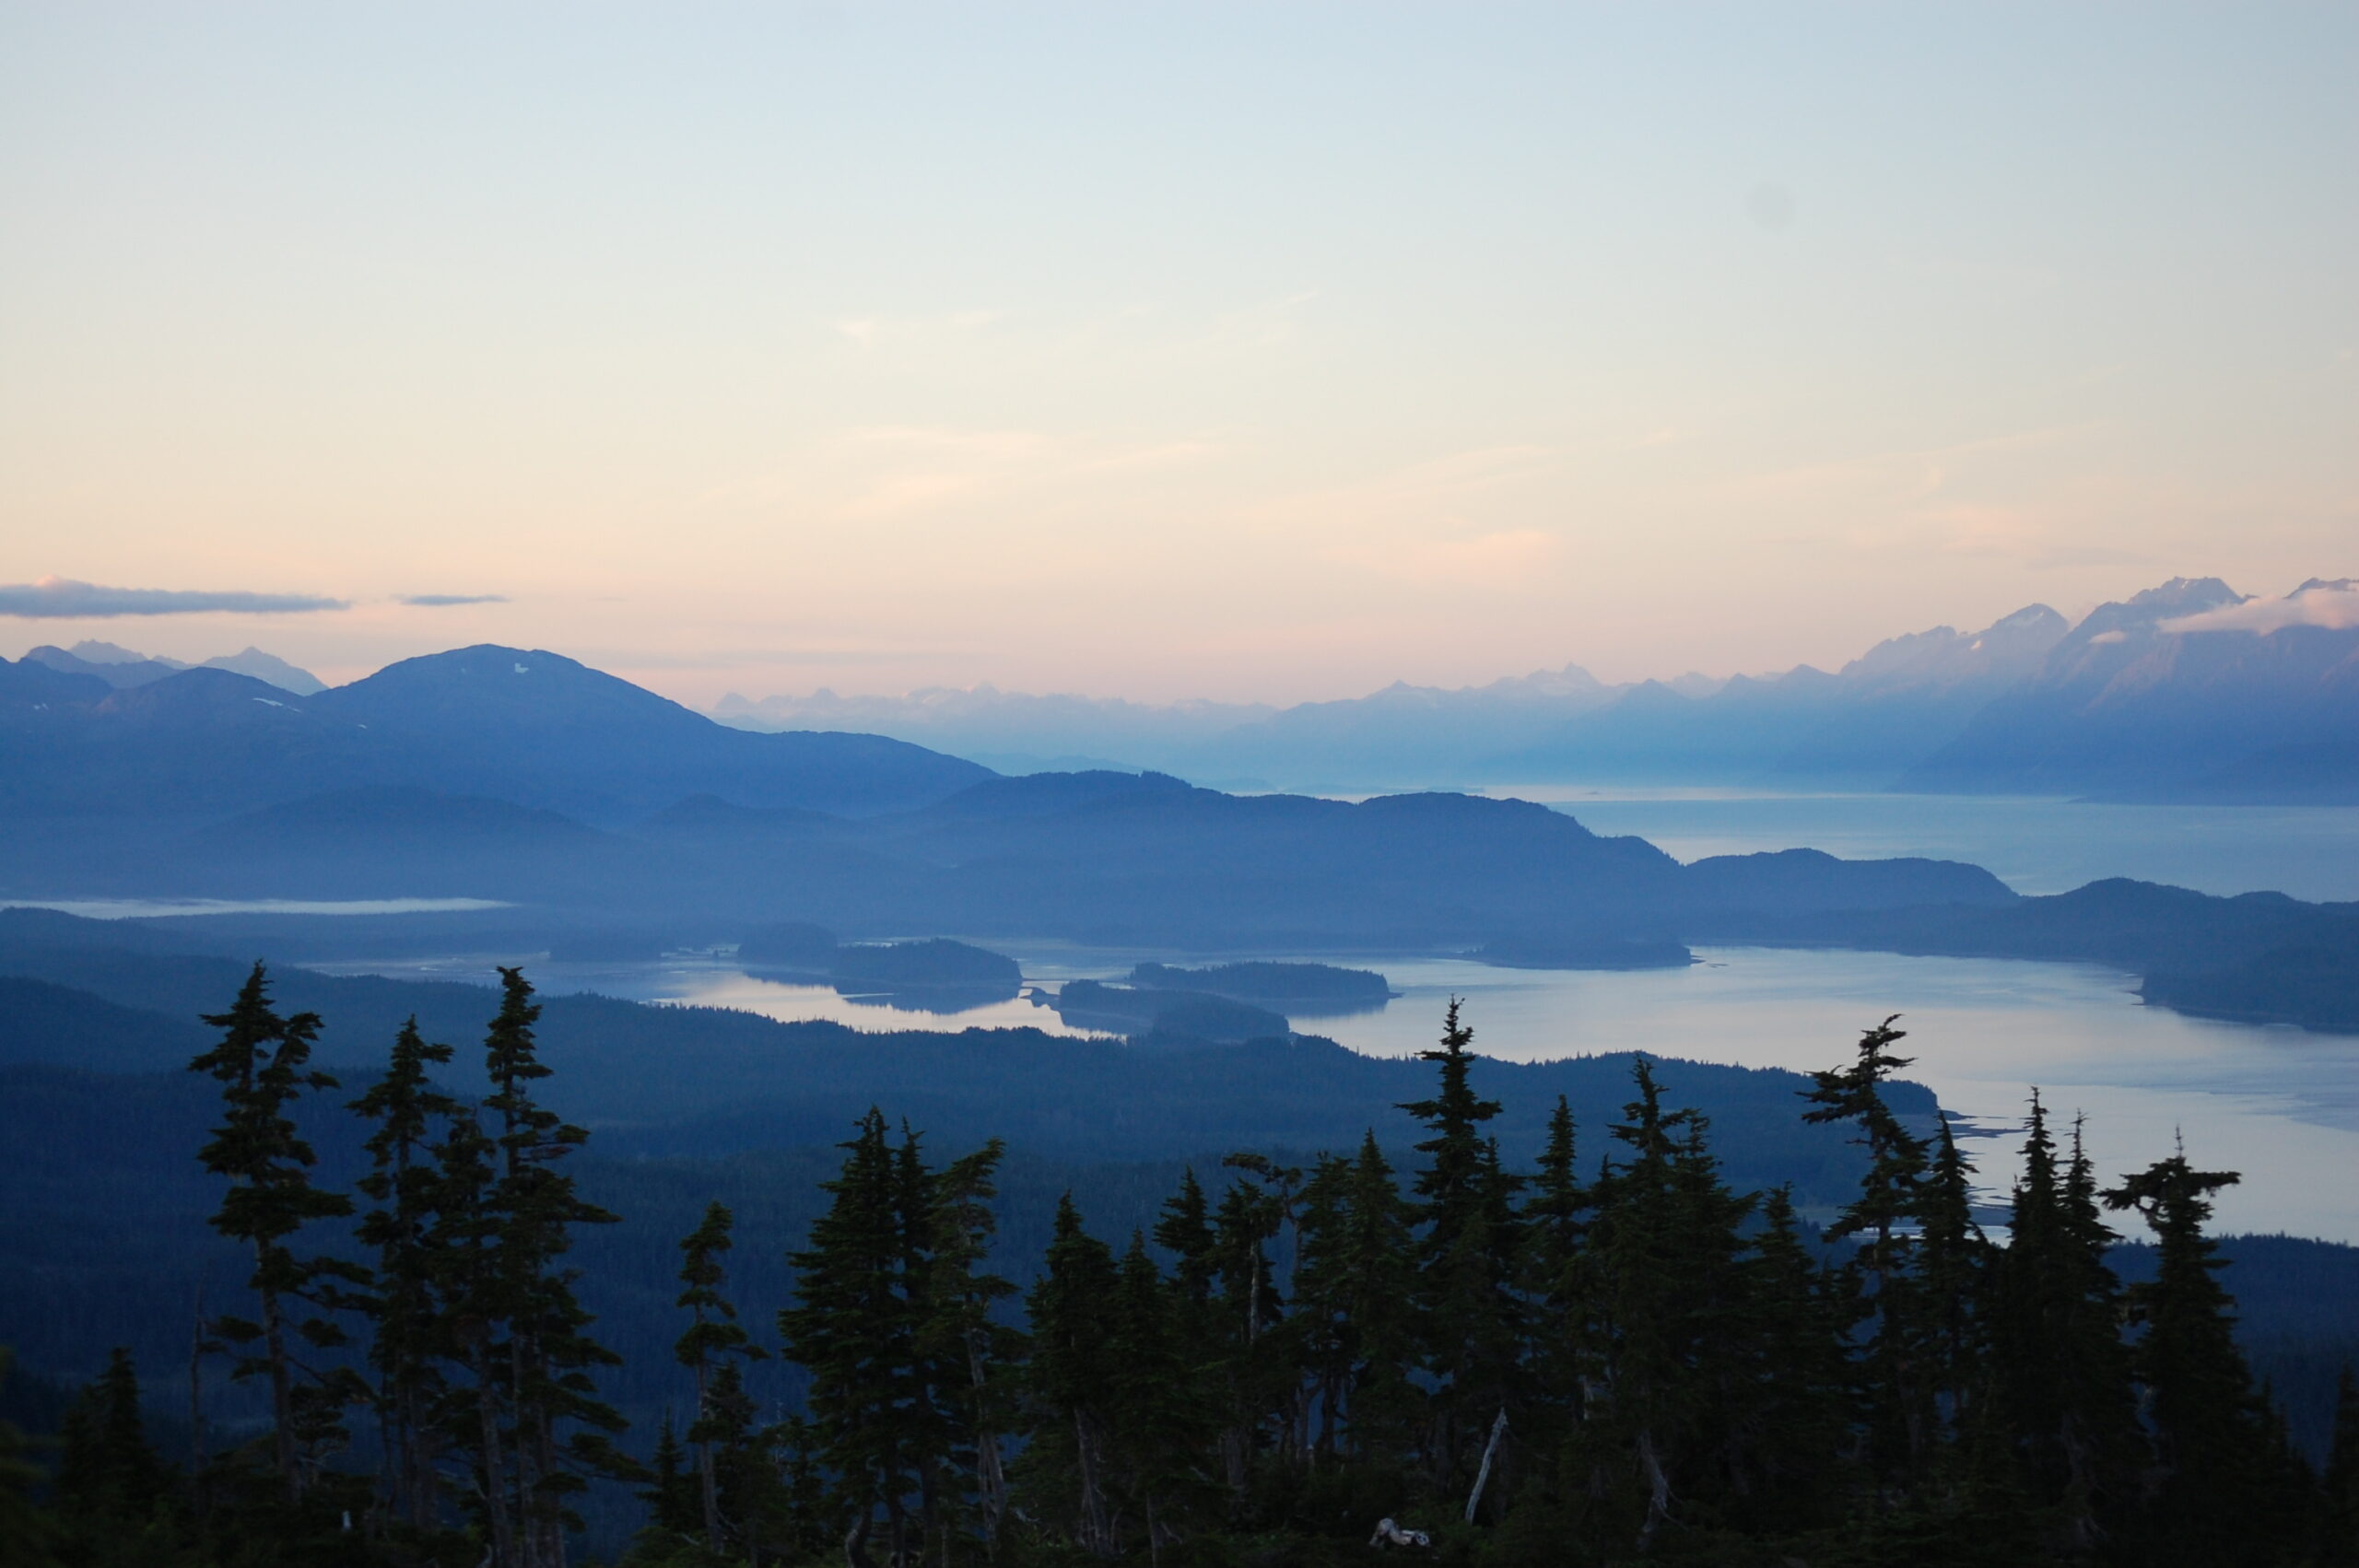 A scene of coniferous trees in the foreground, and hazy blue mountains and coastal ocean in the background.